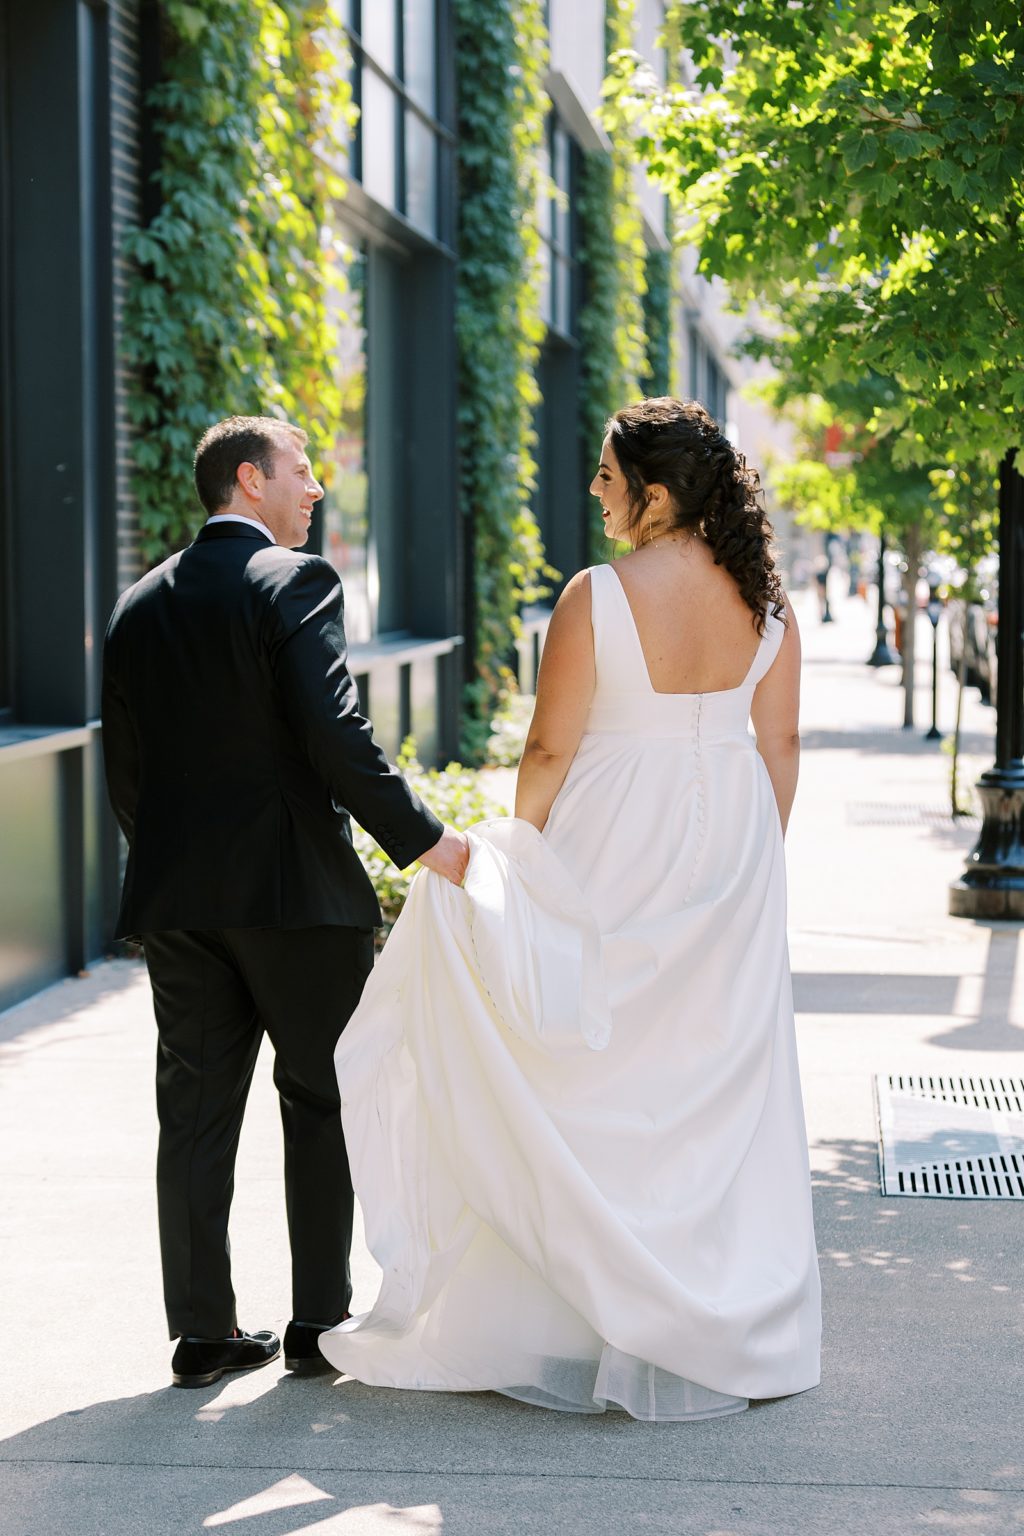 ivan louise indianapolis wedding photographer refinery south